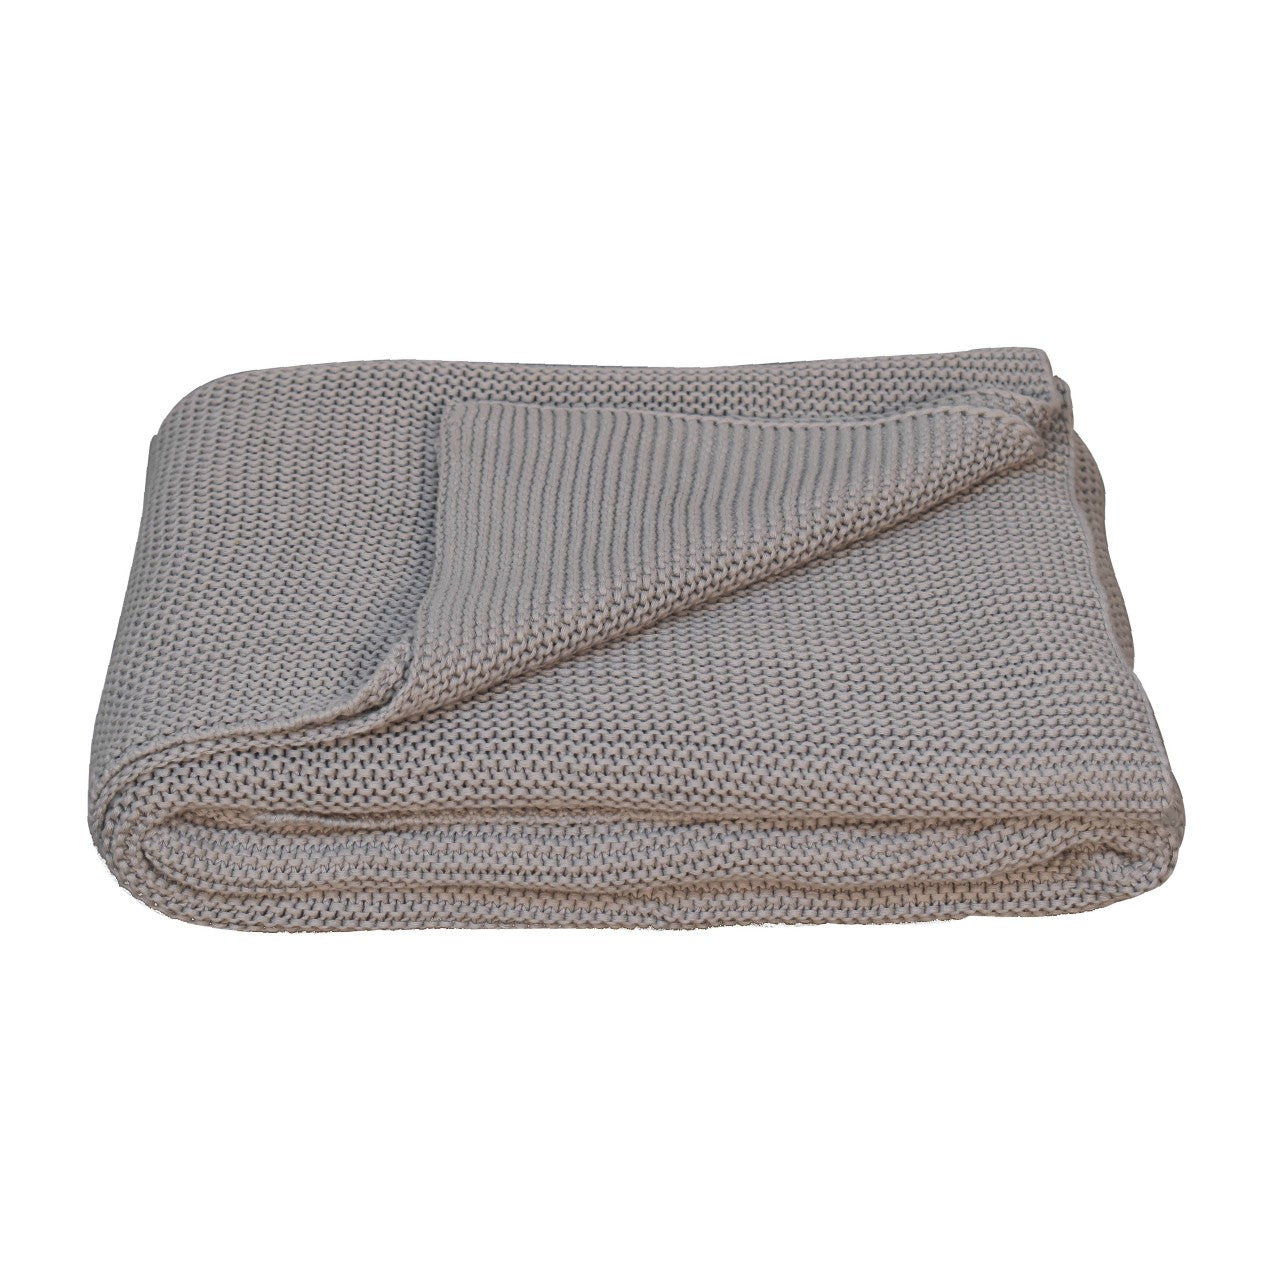 View Grey Knitted Throw Double Bed Size information